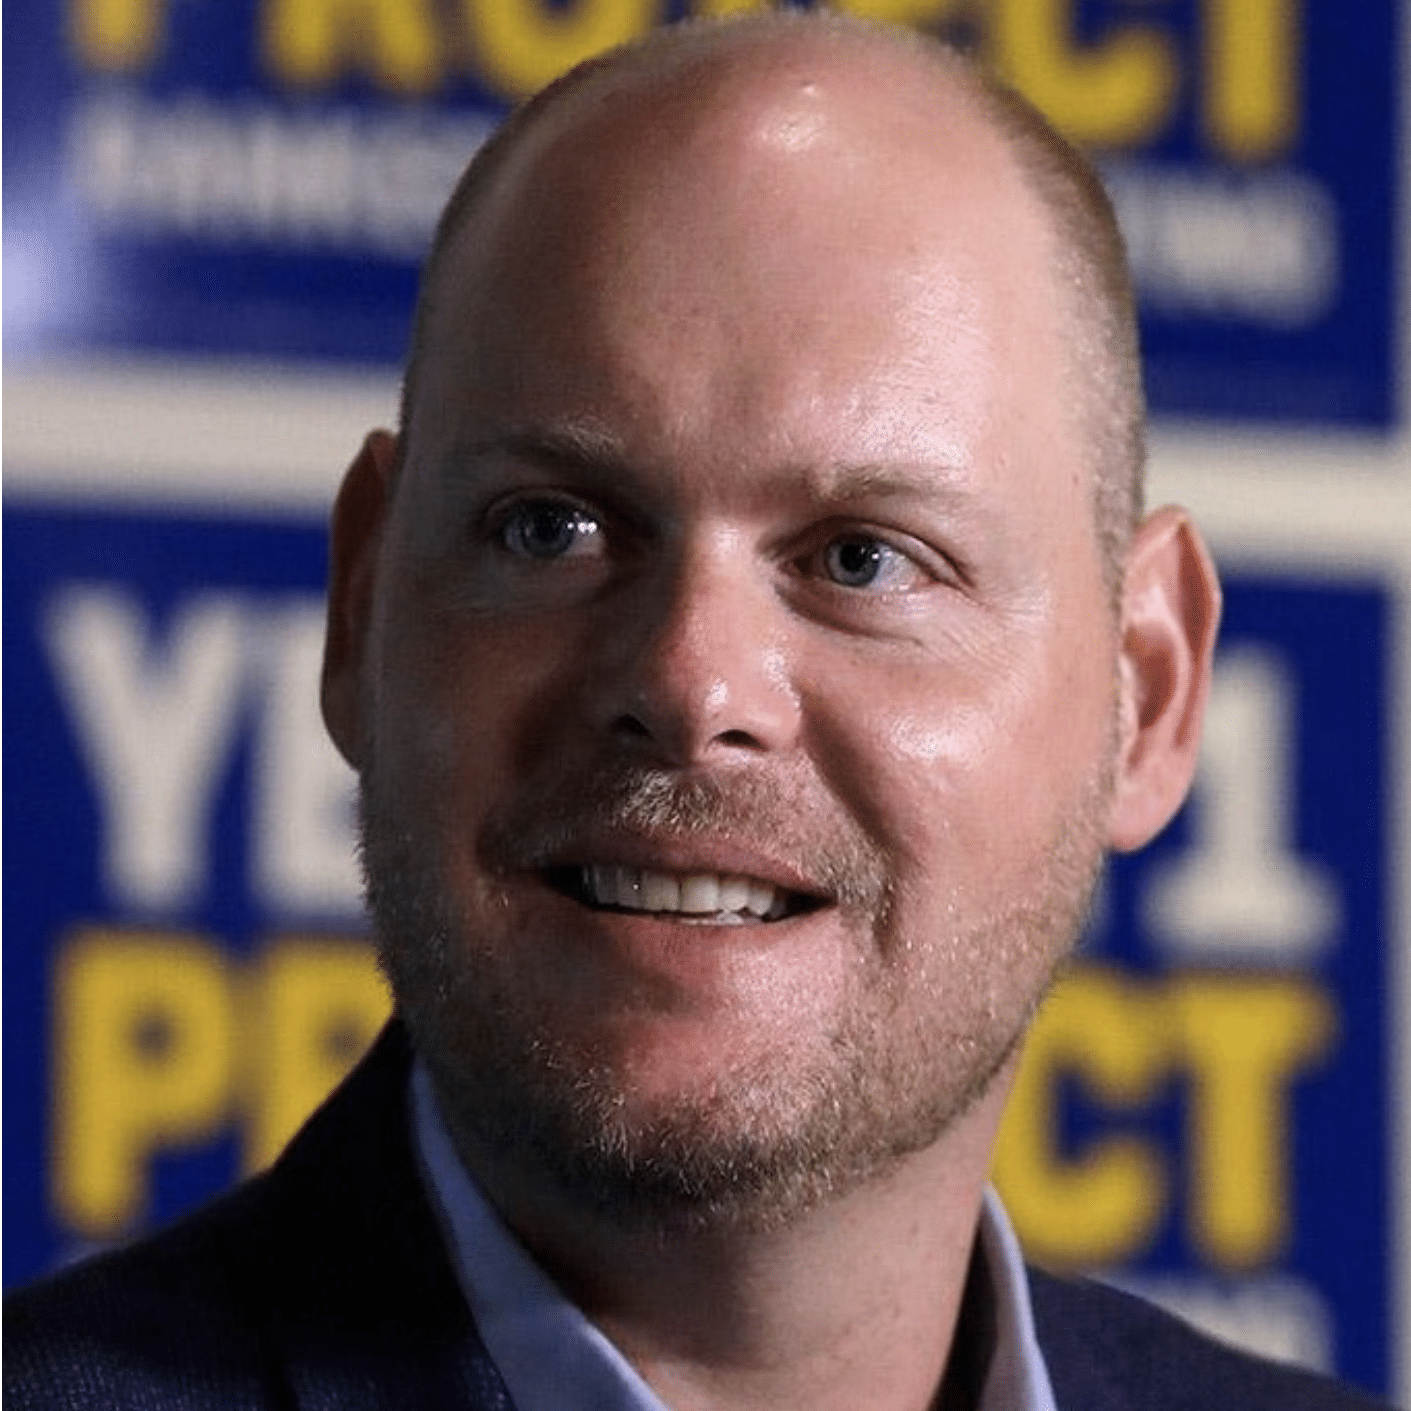 Kyle Bailey led campaign for Ranked-Choice Voting in Maine